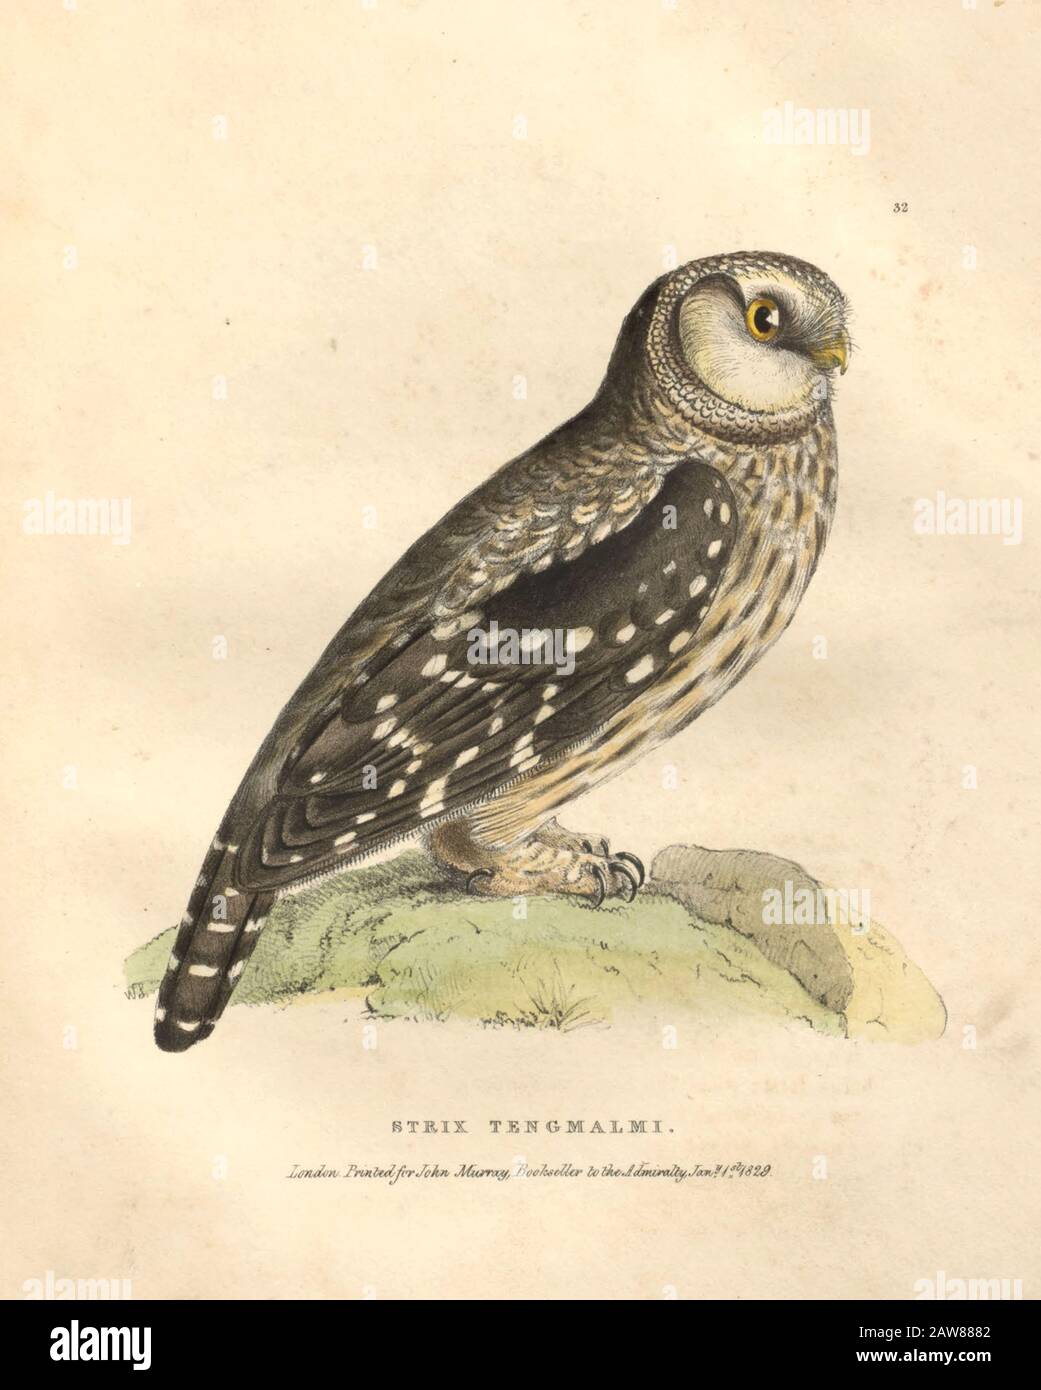 boreal owl (Aegolius funereus syn Strix tengmalmi), color plate of North American birds from Fauna boreali-americana; or, The zoology of the northern parts of British America, containing descriptions of the objects of natural history collected on the late northern land expeditions under command of Capt. Sir John Franklin by Richardson, John, Sir, 1787-1865 Published 1829 Stock Photo